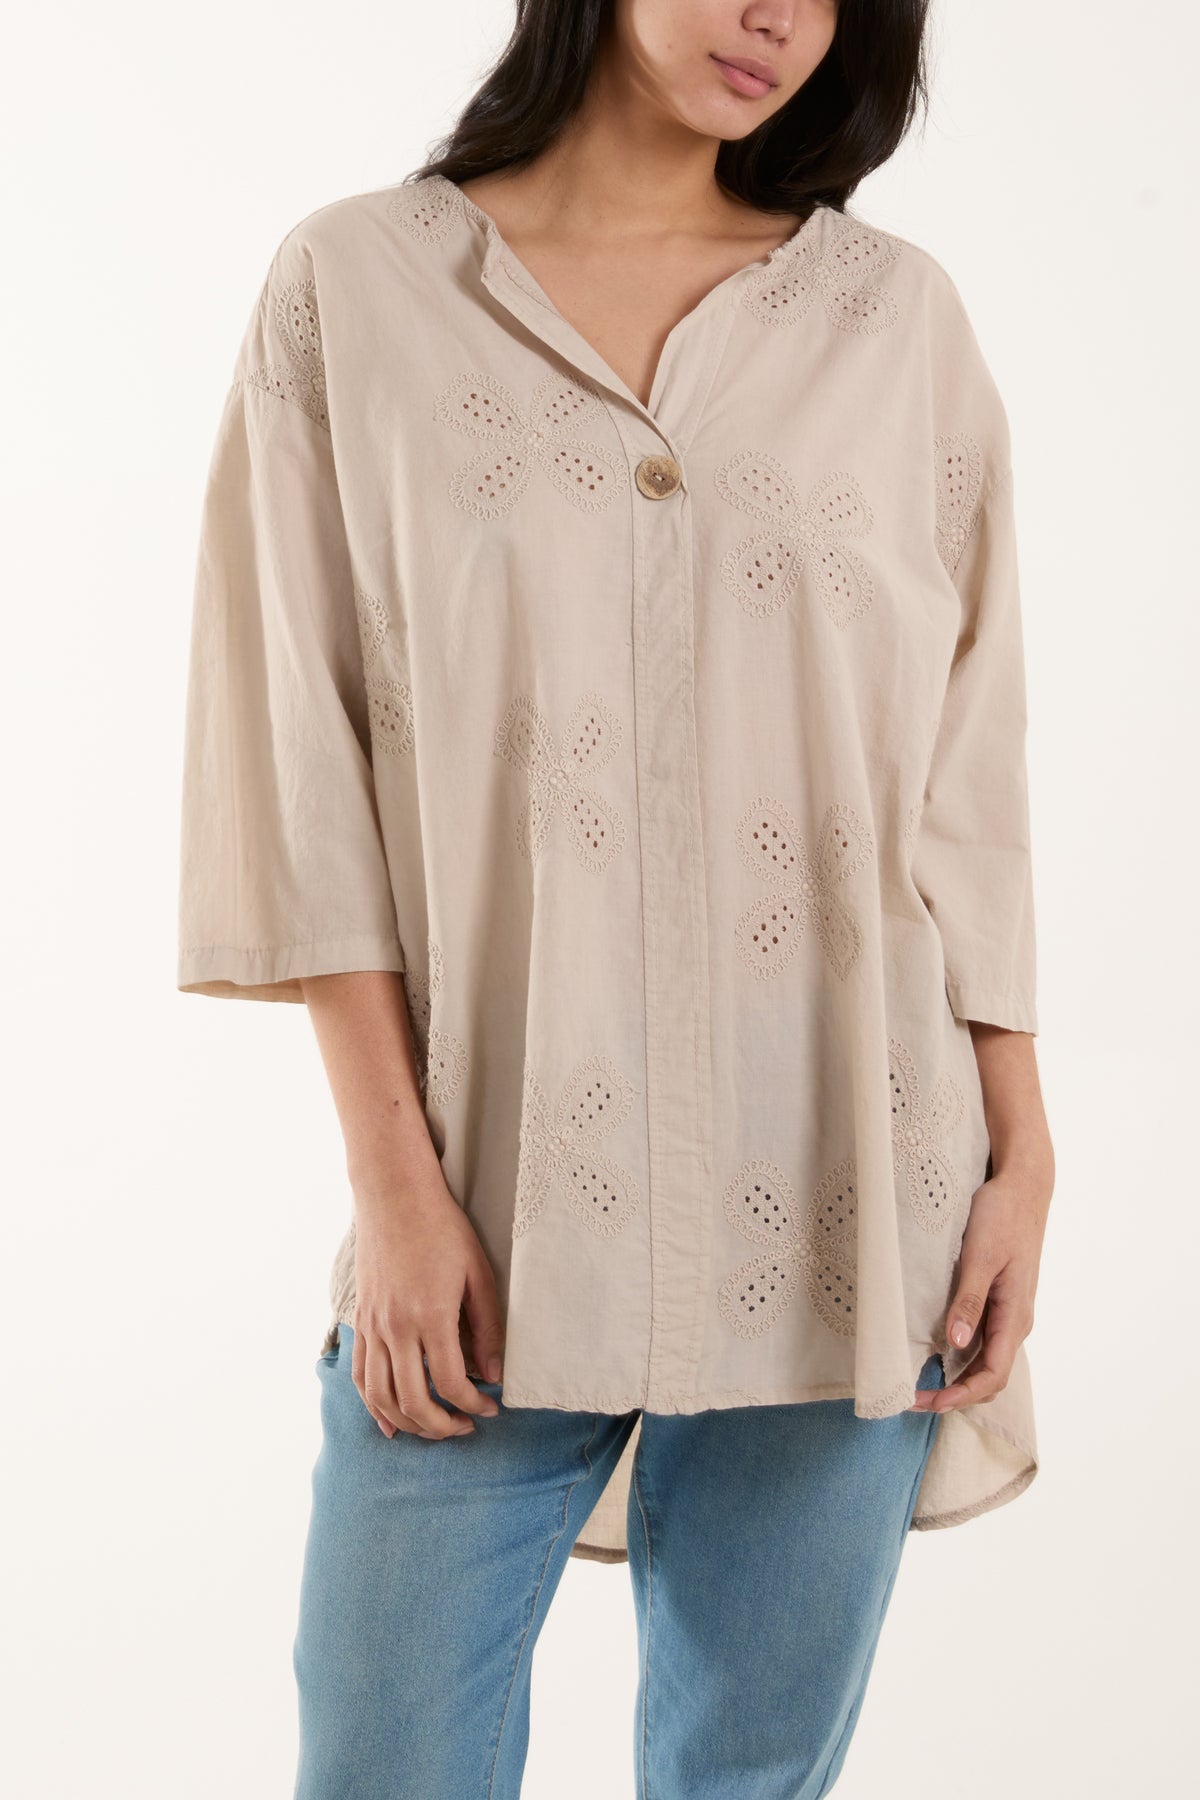 Embroidered Daisy Cotton Blouse